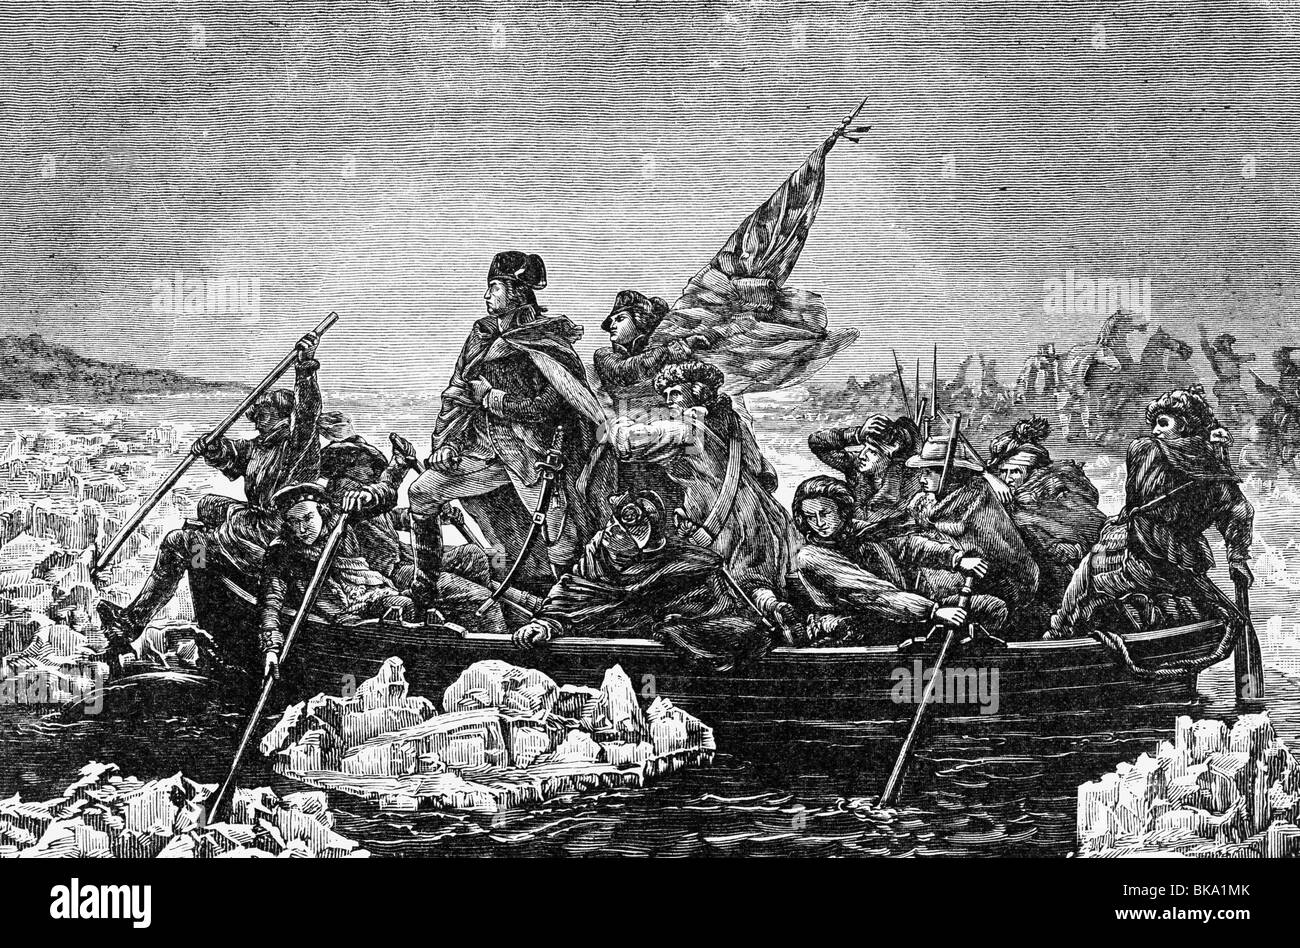 geography / travel, USA, War of Independence 1775 - 1783, Battle of Trenton, New Jersey, 26.12.1776, General George Washington crossing the Delaware, wood engraving after painting by Emanuel Leutze, 1851, American, river, ice, winter, boat, 18th century, historic, historical, male, man, men, people, Stock Photo